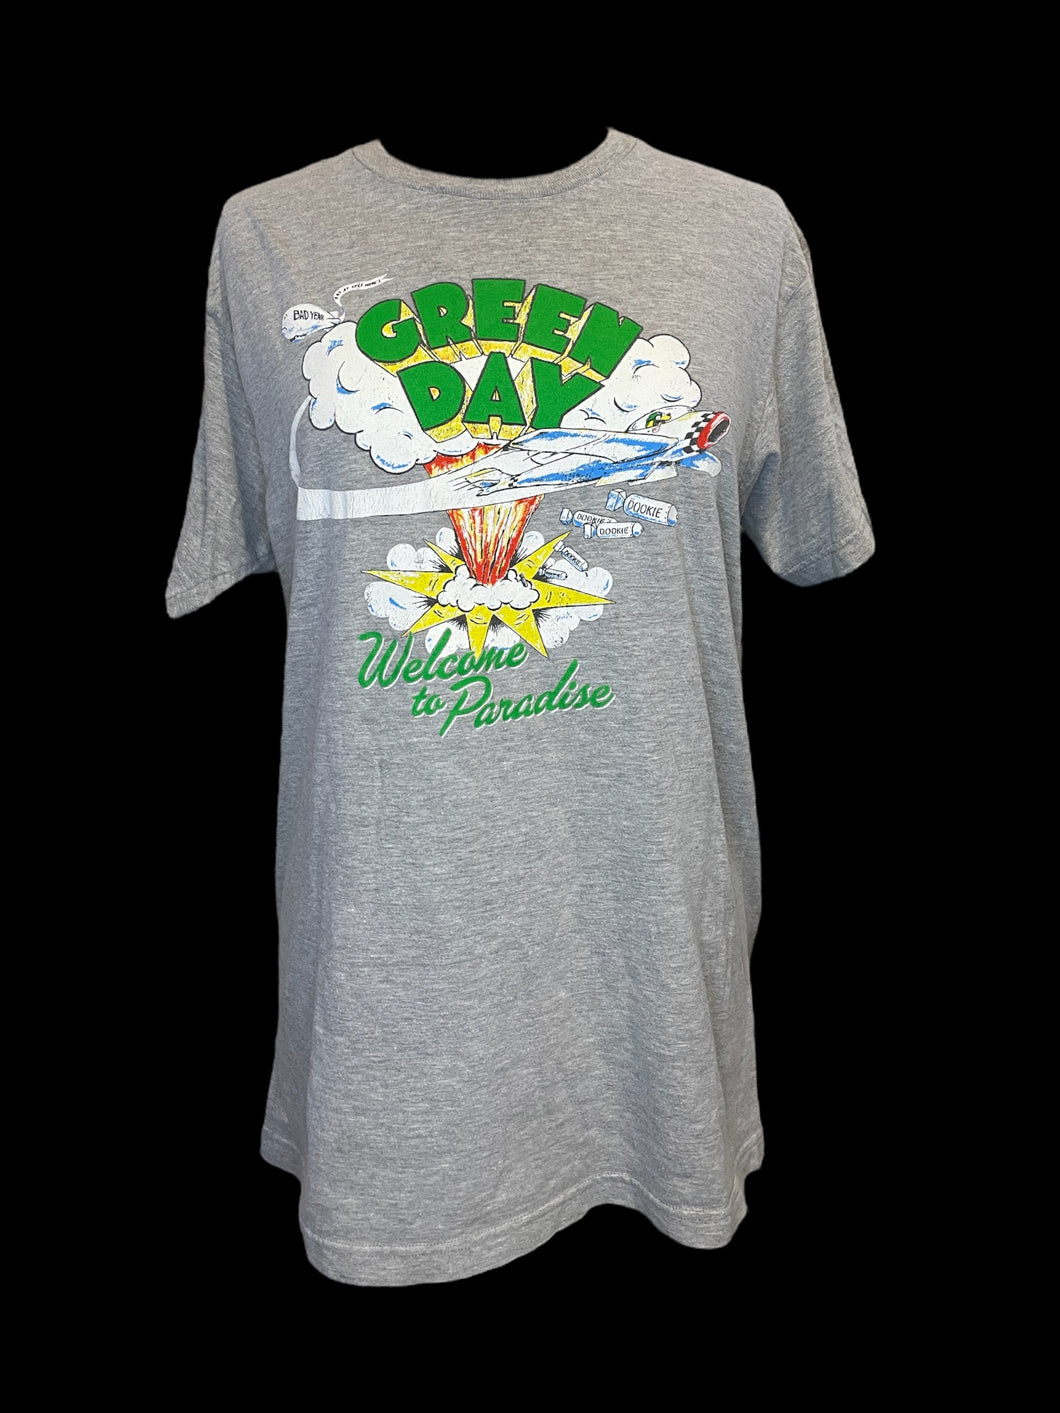 0X Heathered grey “Green Day” short sleeve top w/ Dookie album graphic, & “Welcome To Paradise” text